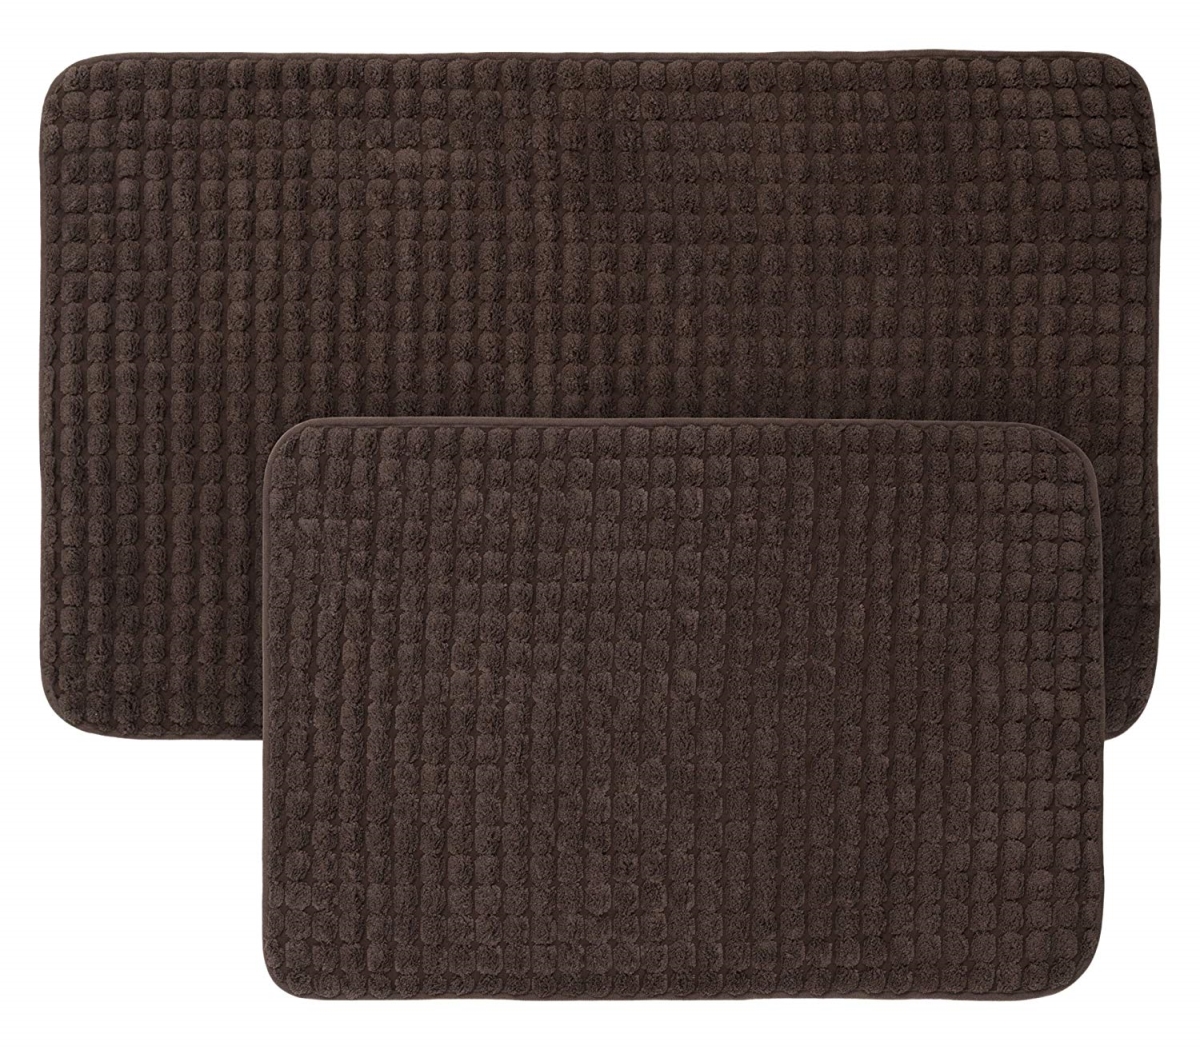 Picture of Bedford Home 67A-23321 2 Piece Memory Foam Bath Mat Set by Woven Jacquard Fleece - Chocolate